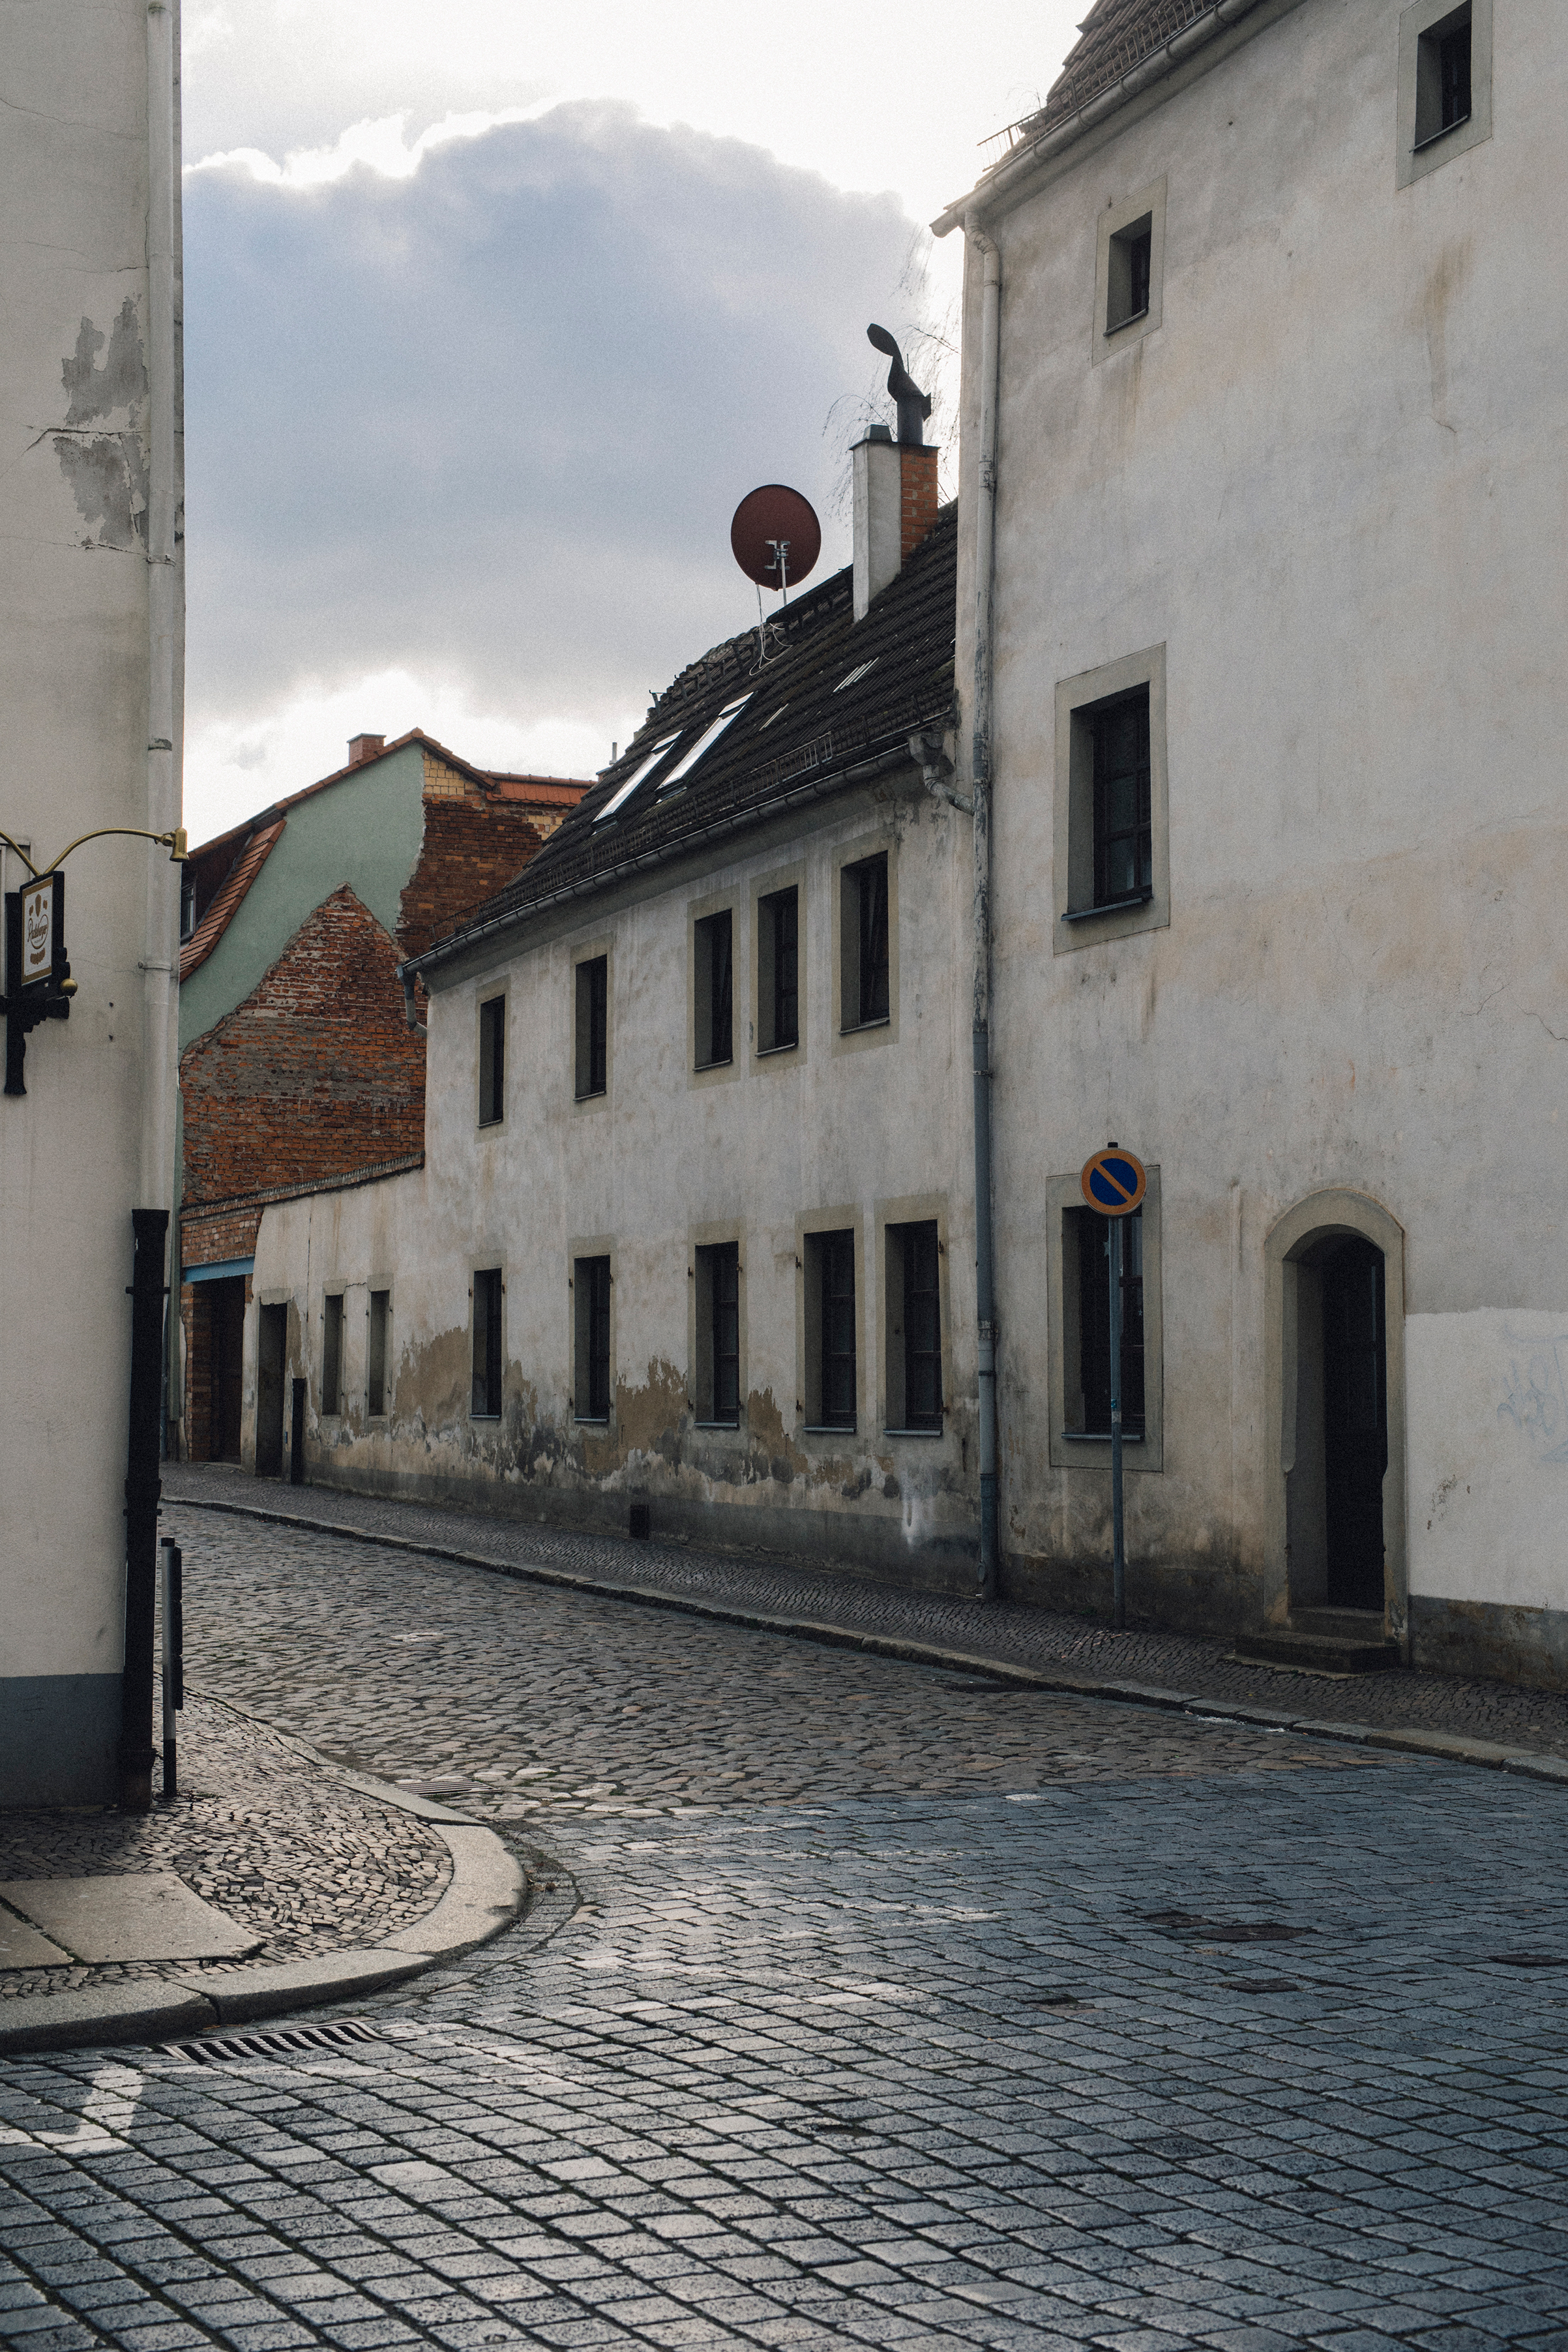 A street in Torgau. Jabar and Murad both now live in Germany, just a few hundred miles apart. (Mustafah Abdulaziz for TIME)